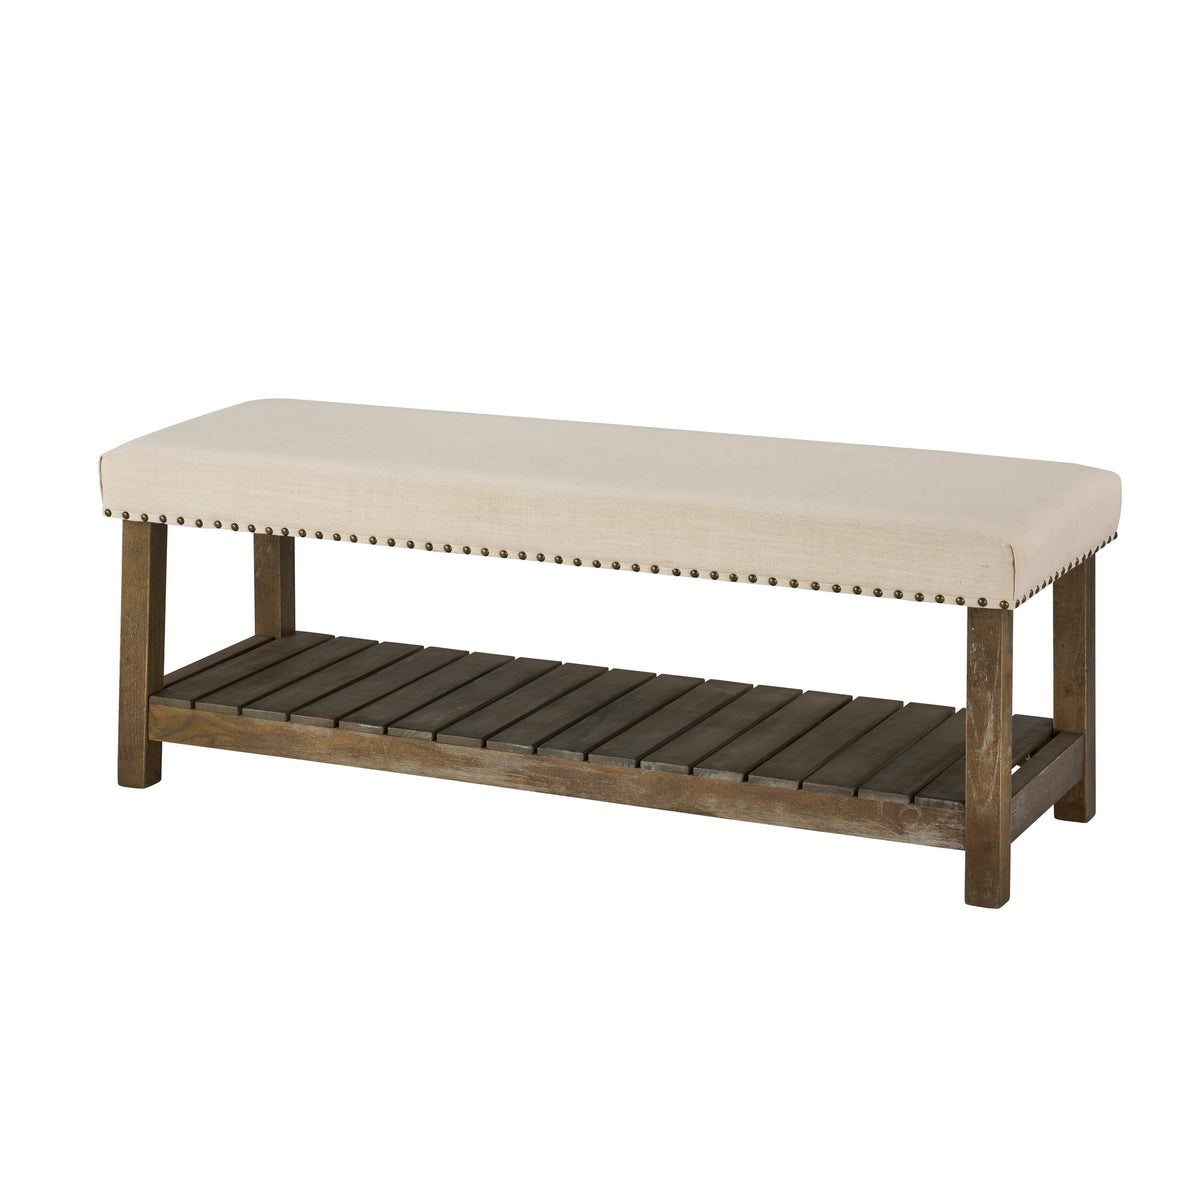 *-Bailey Bench (Putty)